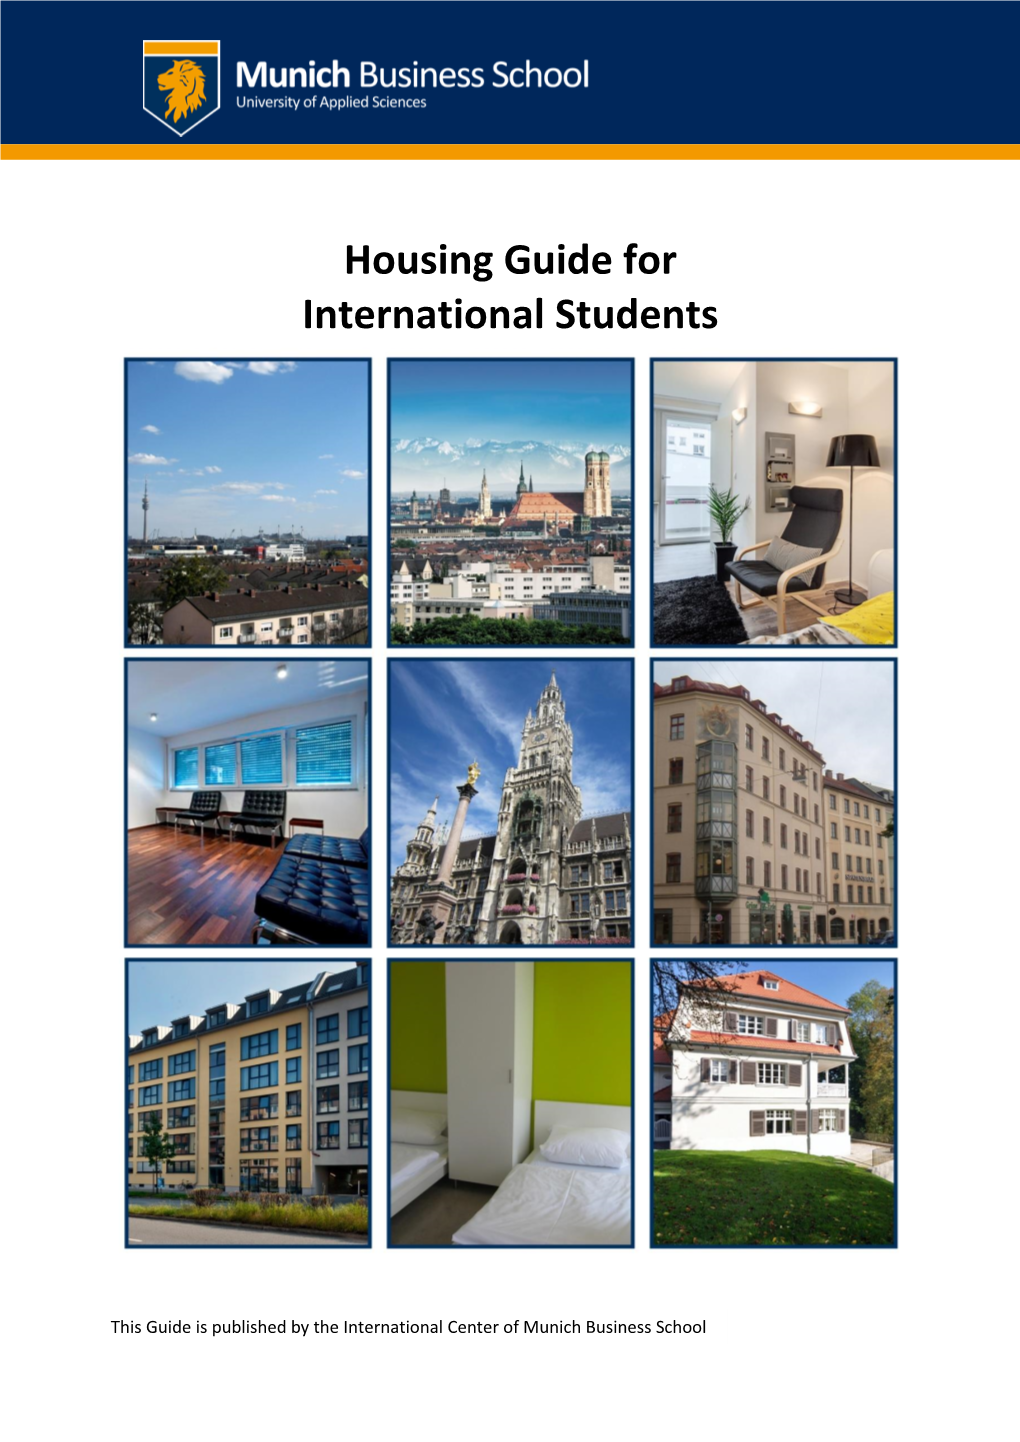 Housing Guide for International Students